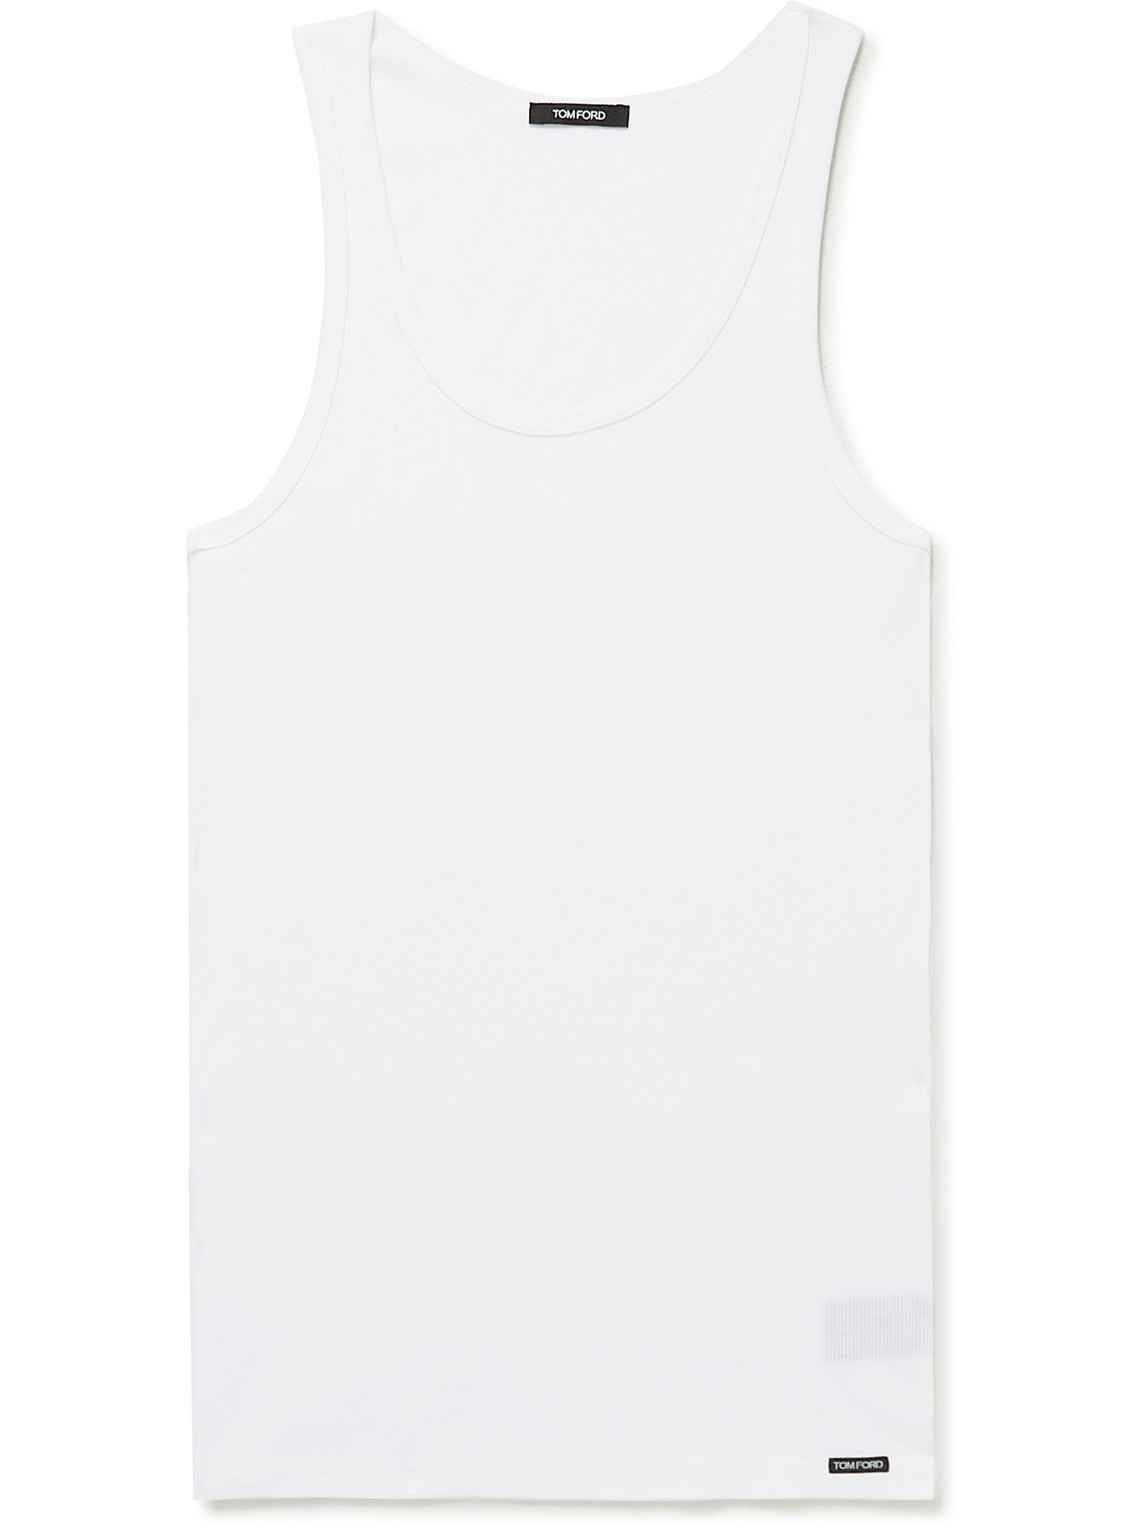 TOM FORD - Ribbed Cotton and Modal-Blend Tank Top - Men - White - M von TOM FORD